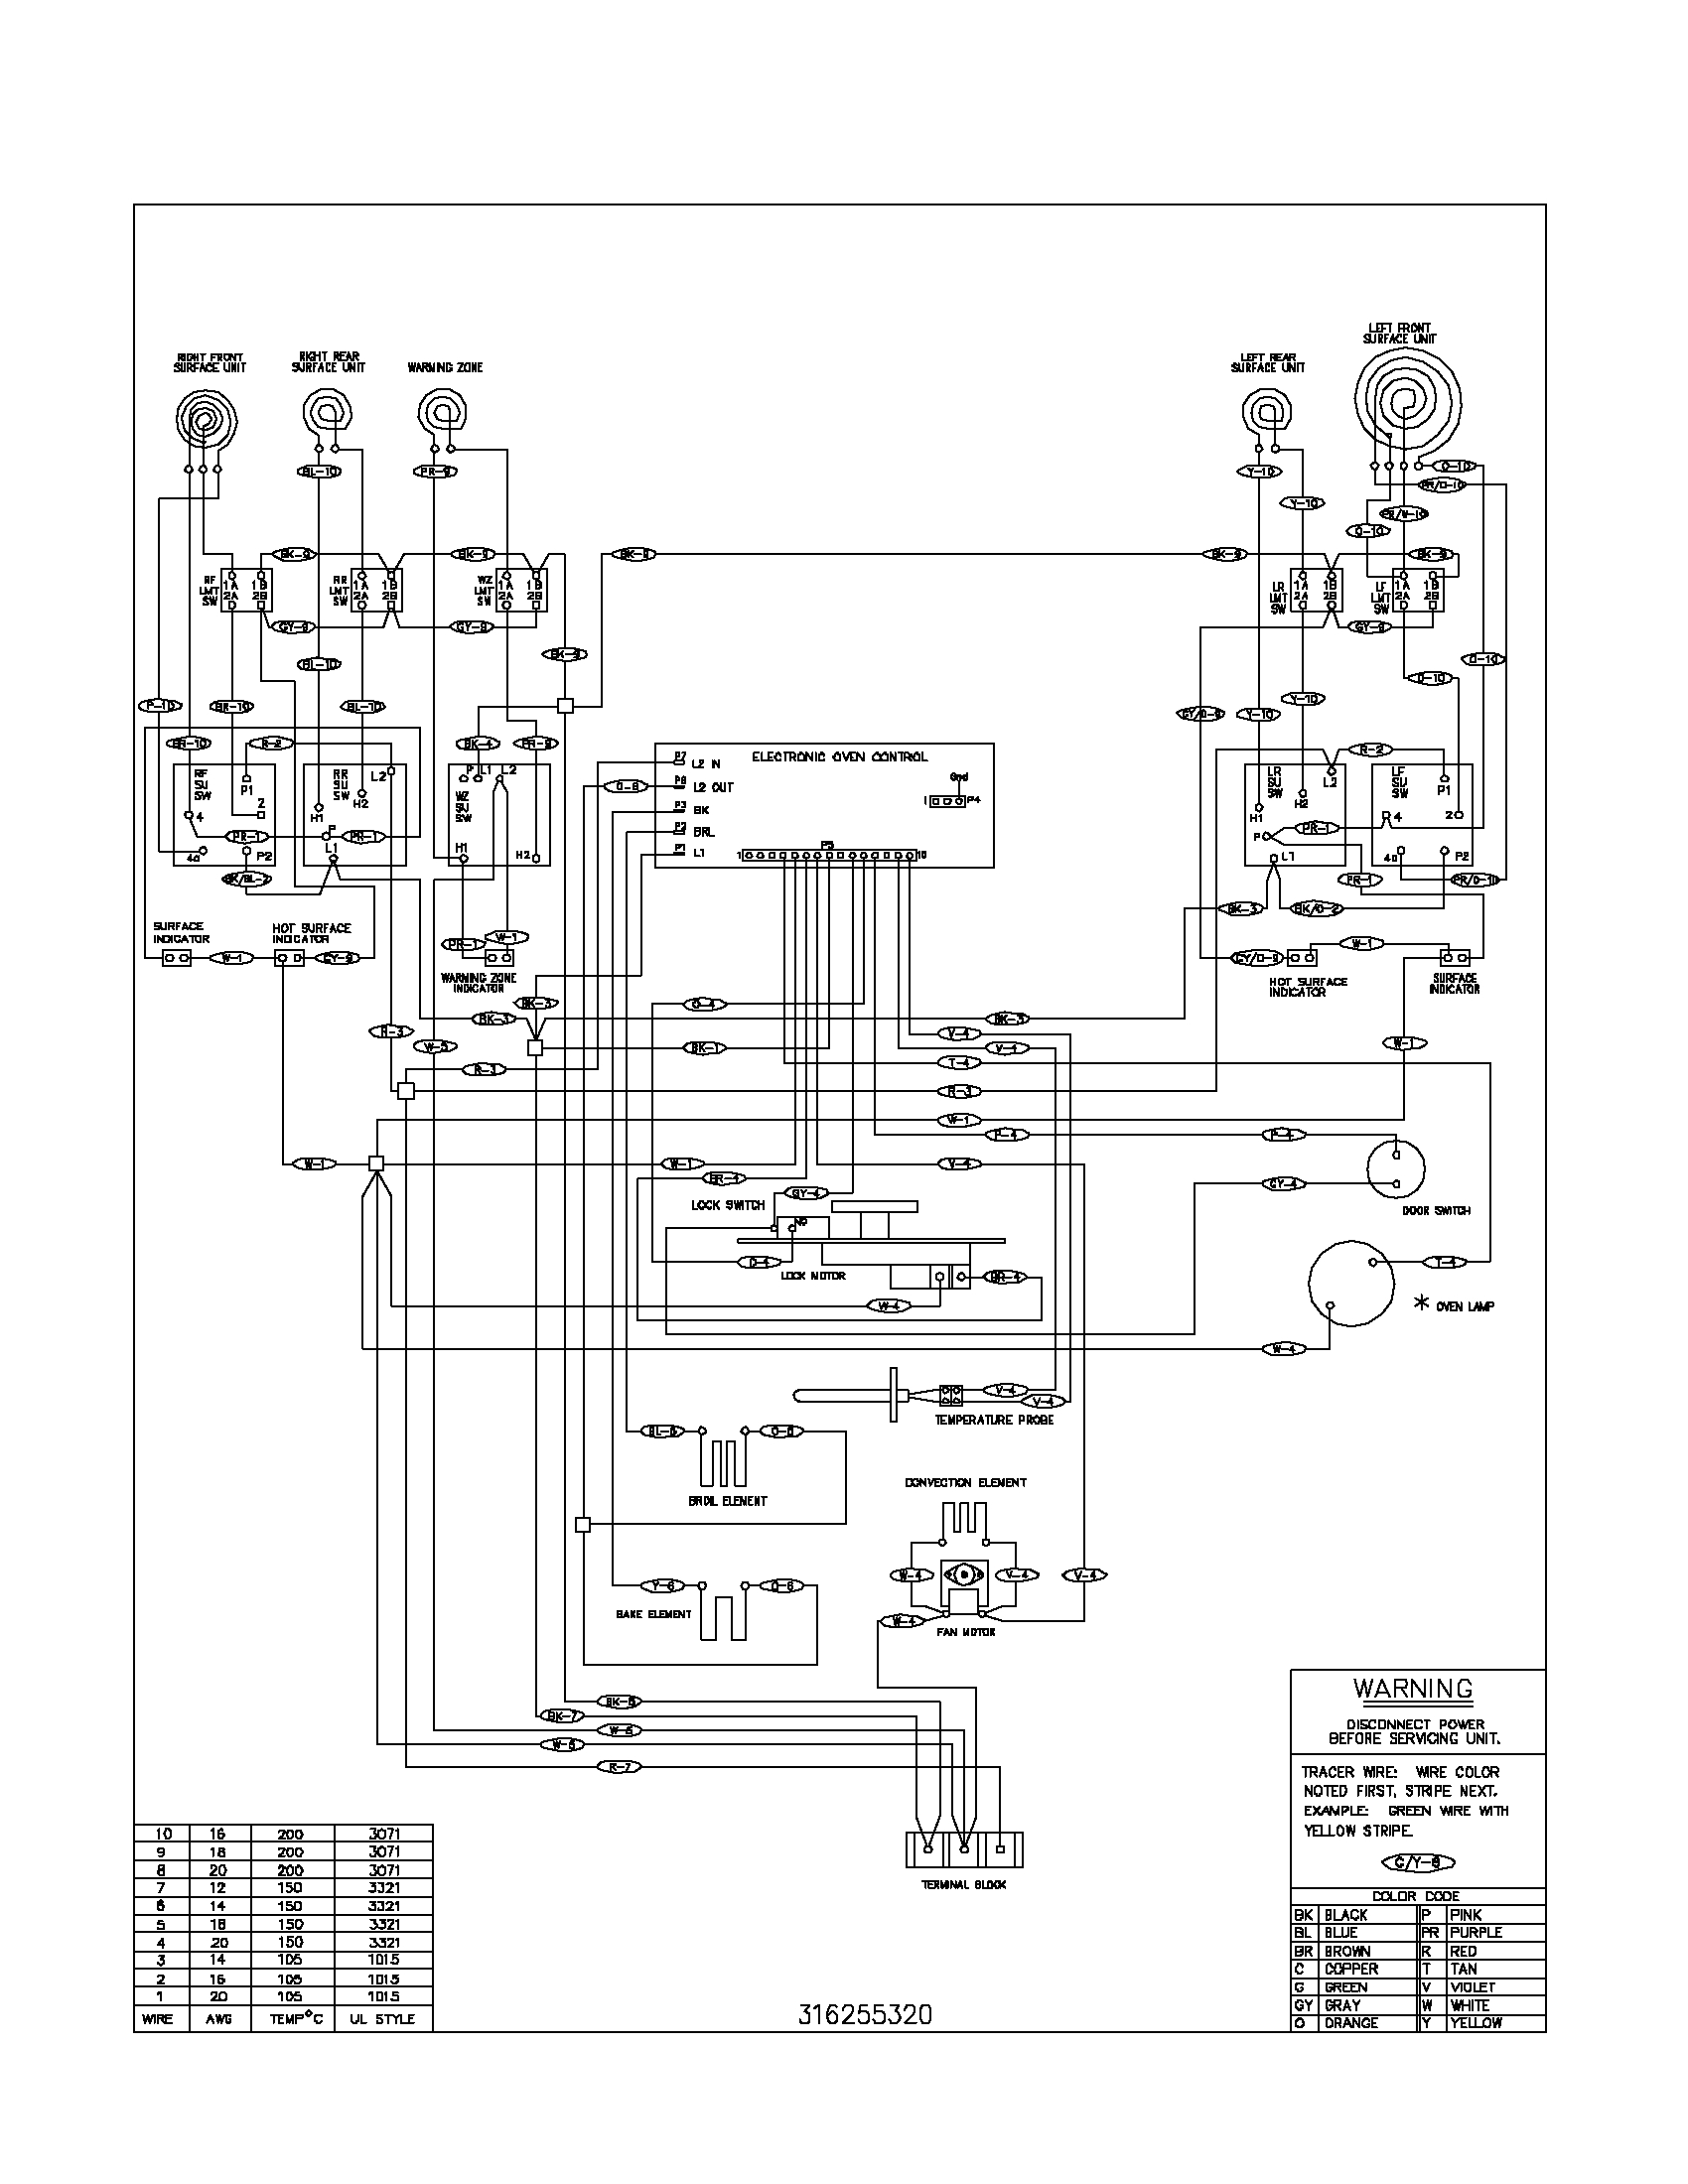 wiring diagram for ge cafe stove wiring diagram sortge stove wiring diagram wiring diagram database ge